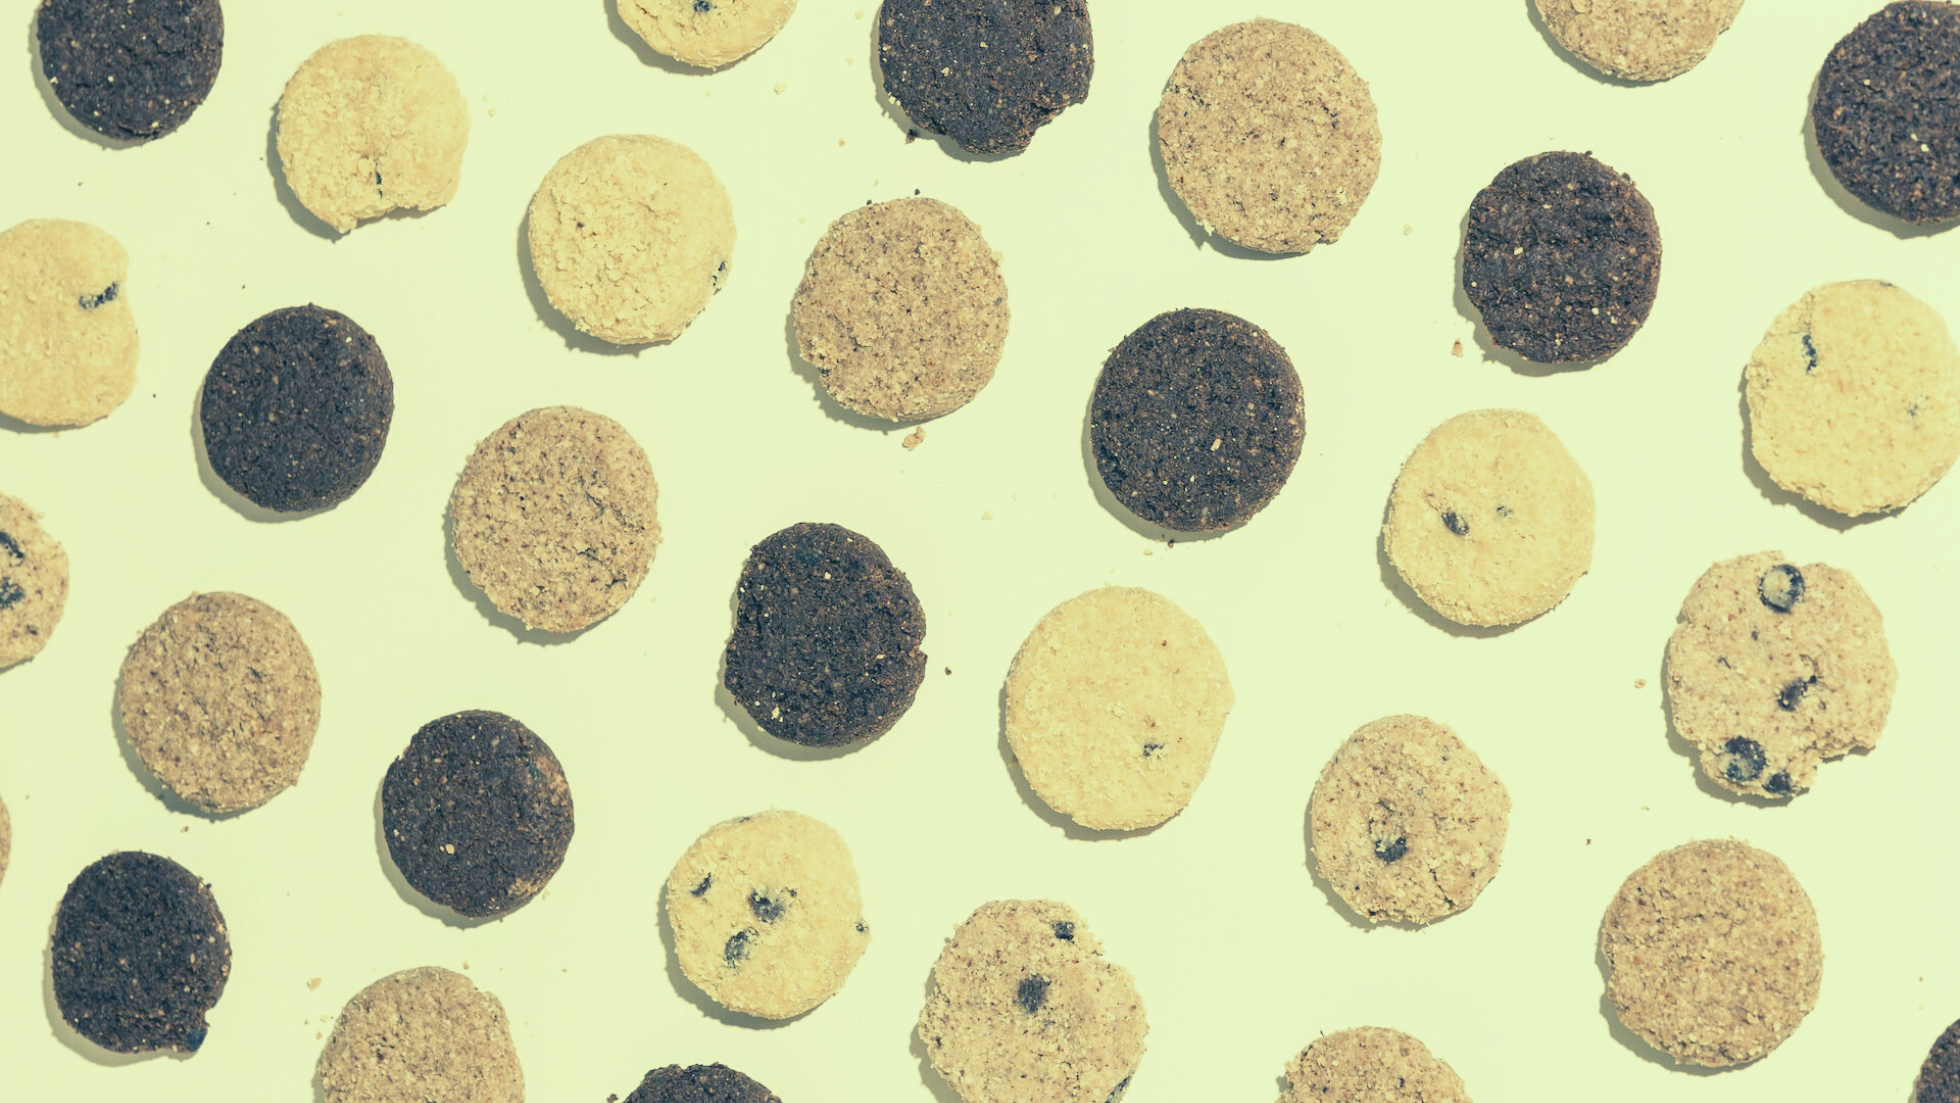 Personalization in a Post-Cookie World: Why Marketers Need to Rethink their Marketing Strategy